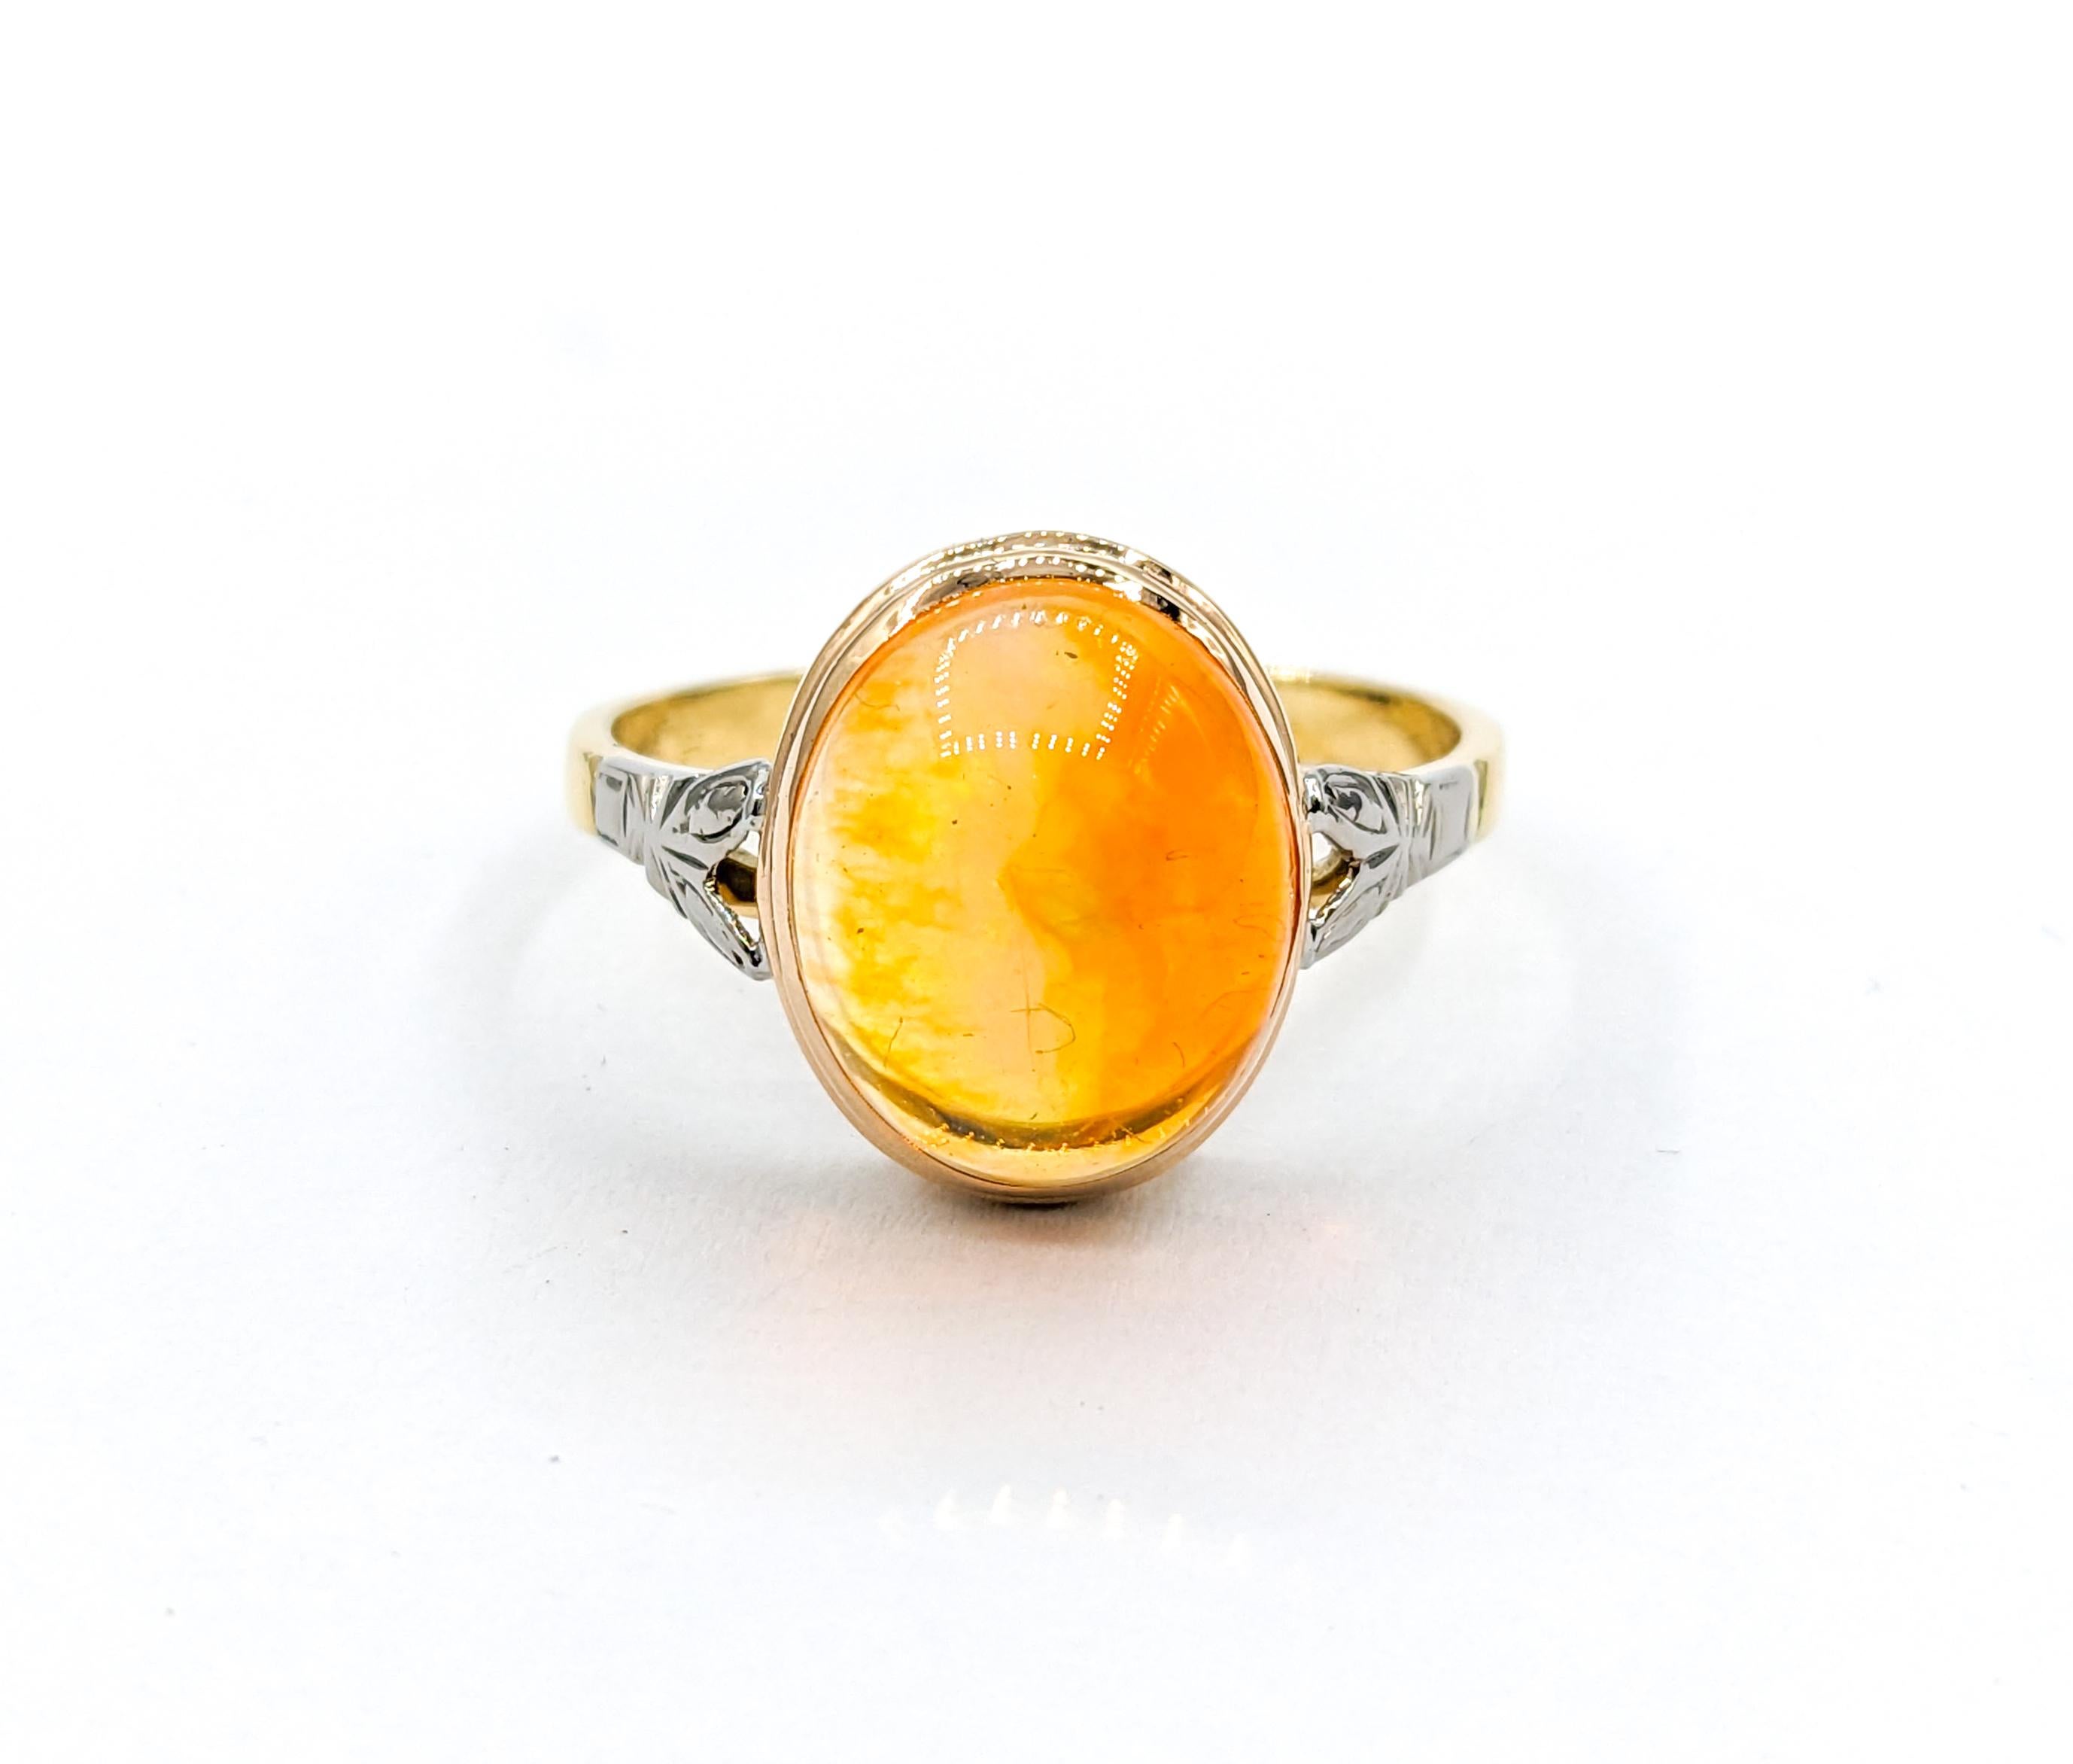 Cabochon Fire Opal Ring In Yellow Gold

Experience elegance with our Vintage Ring, meticulously crafted from 18kt yellow gold. This exquisite piece showcases a stunning 12x10mm Fire Opal, boasting exceptional clarity and a radiant fiery orange tone.